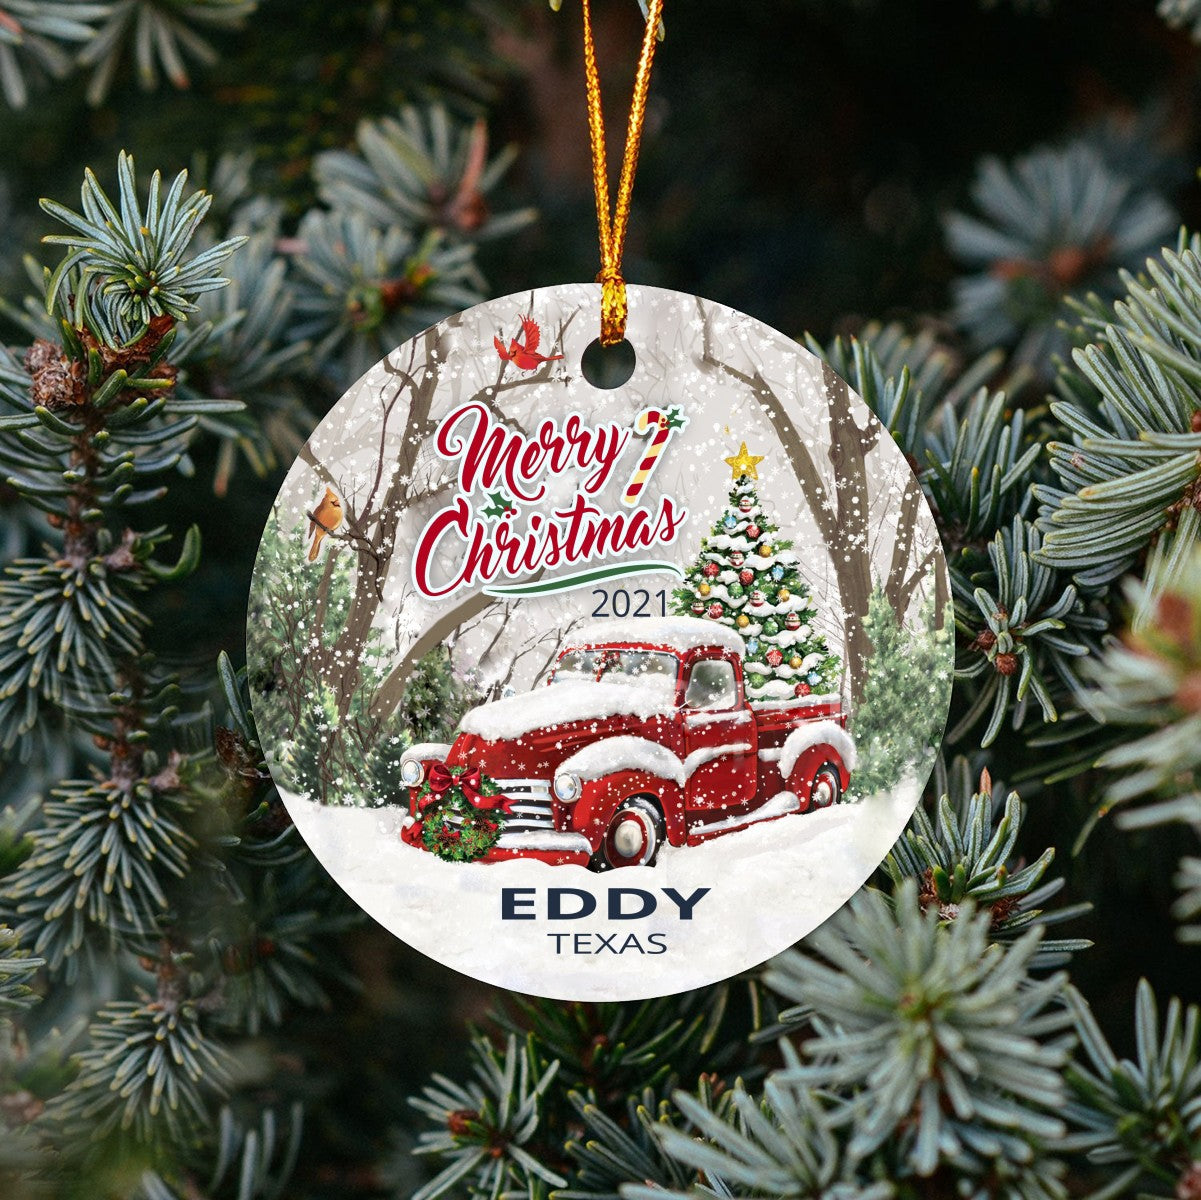 Christmas Tree Ornaments Eddy - Ornament With Name City, State Eddy Texas TX Ornament - Red Truck Xmas Ornaments 3'' Plastic Gift For Family, Friend And Housewarming